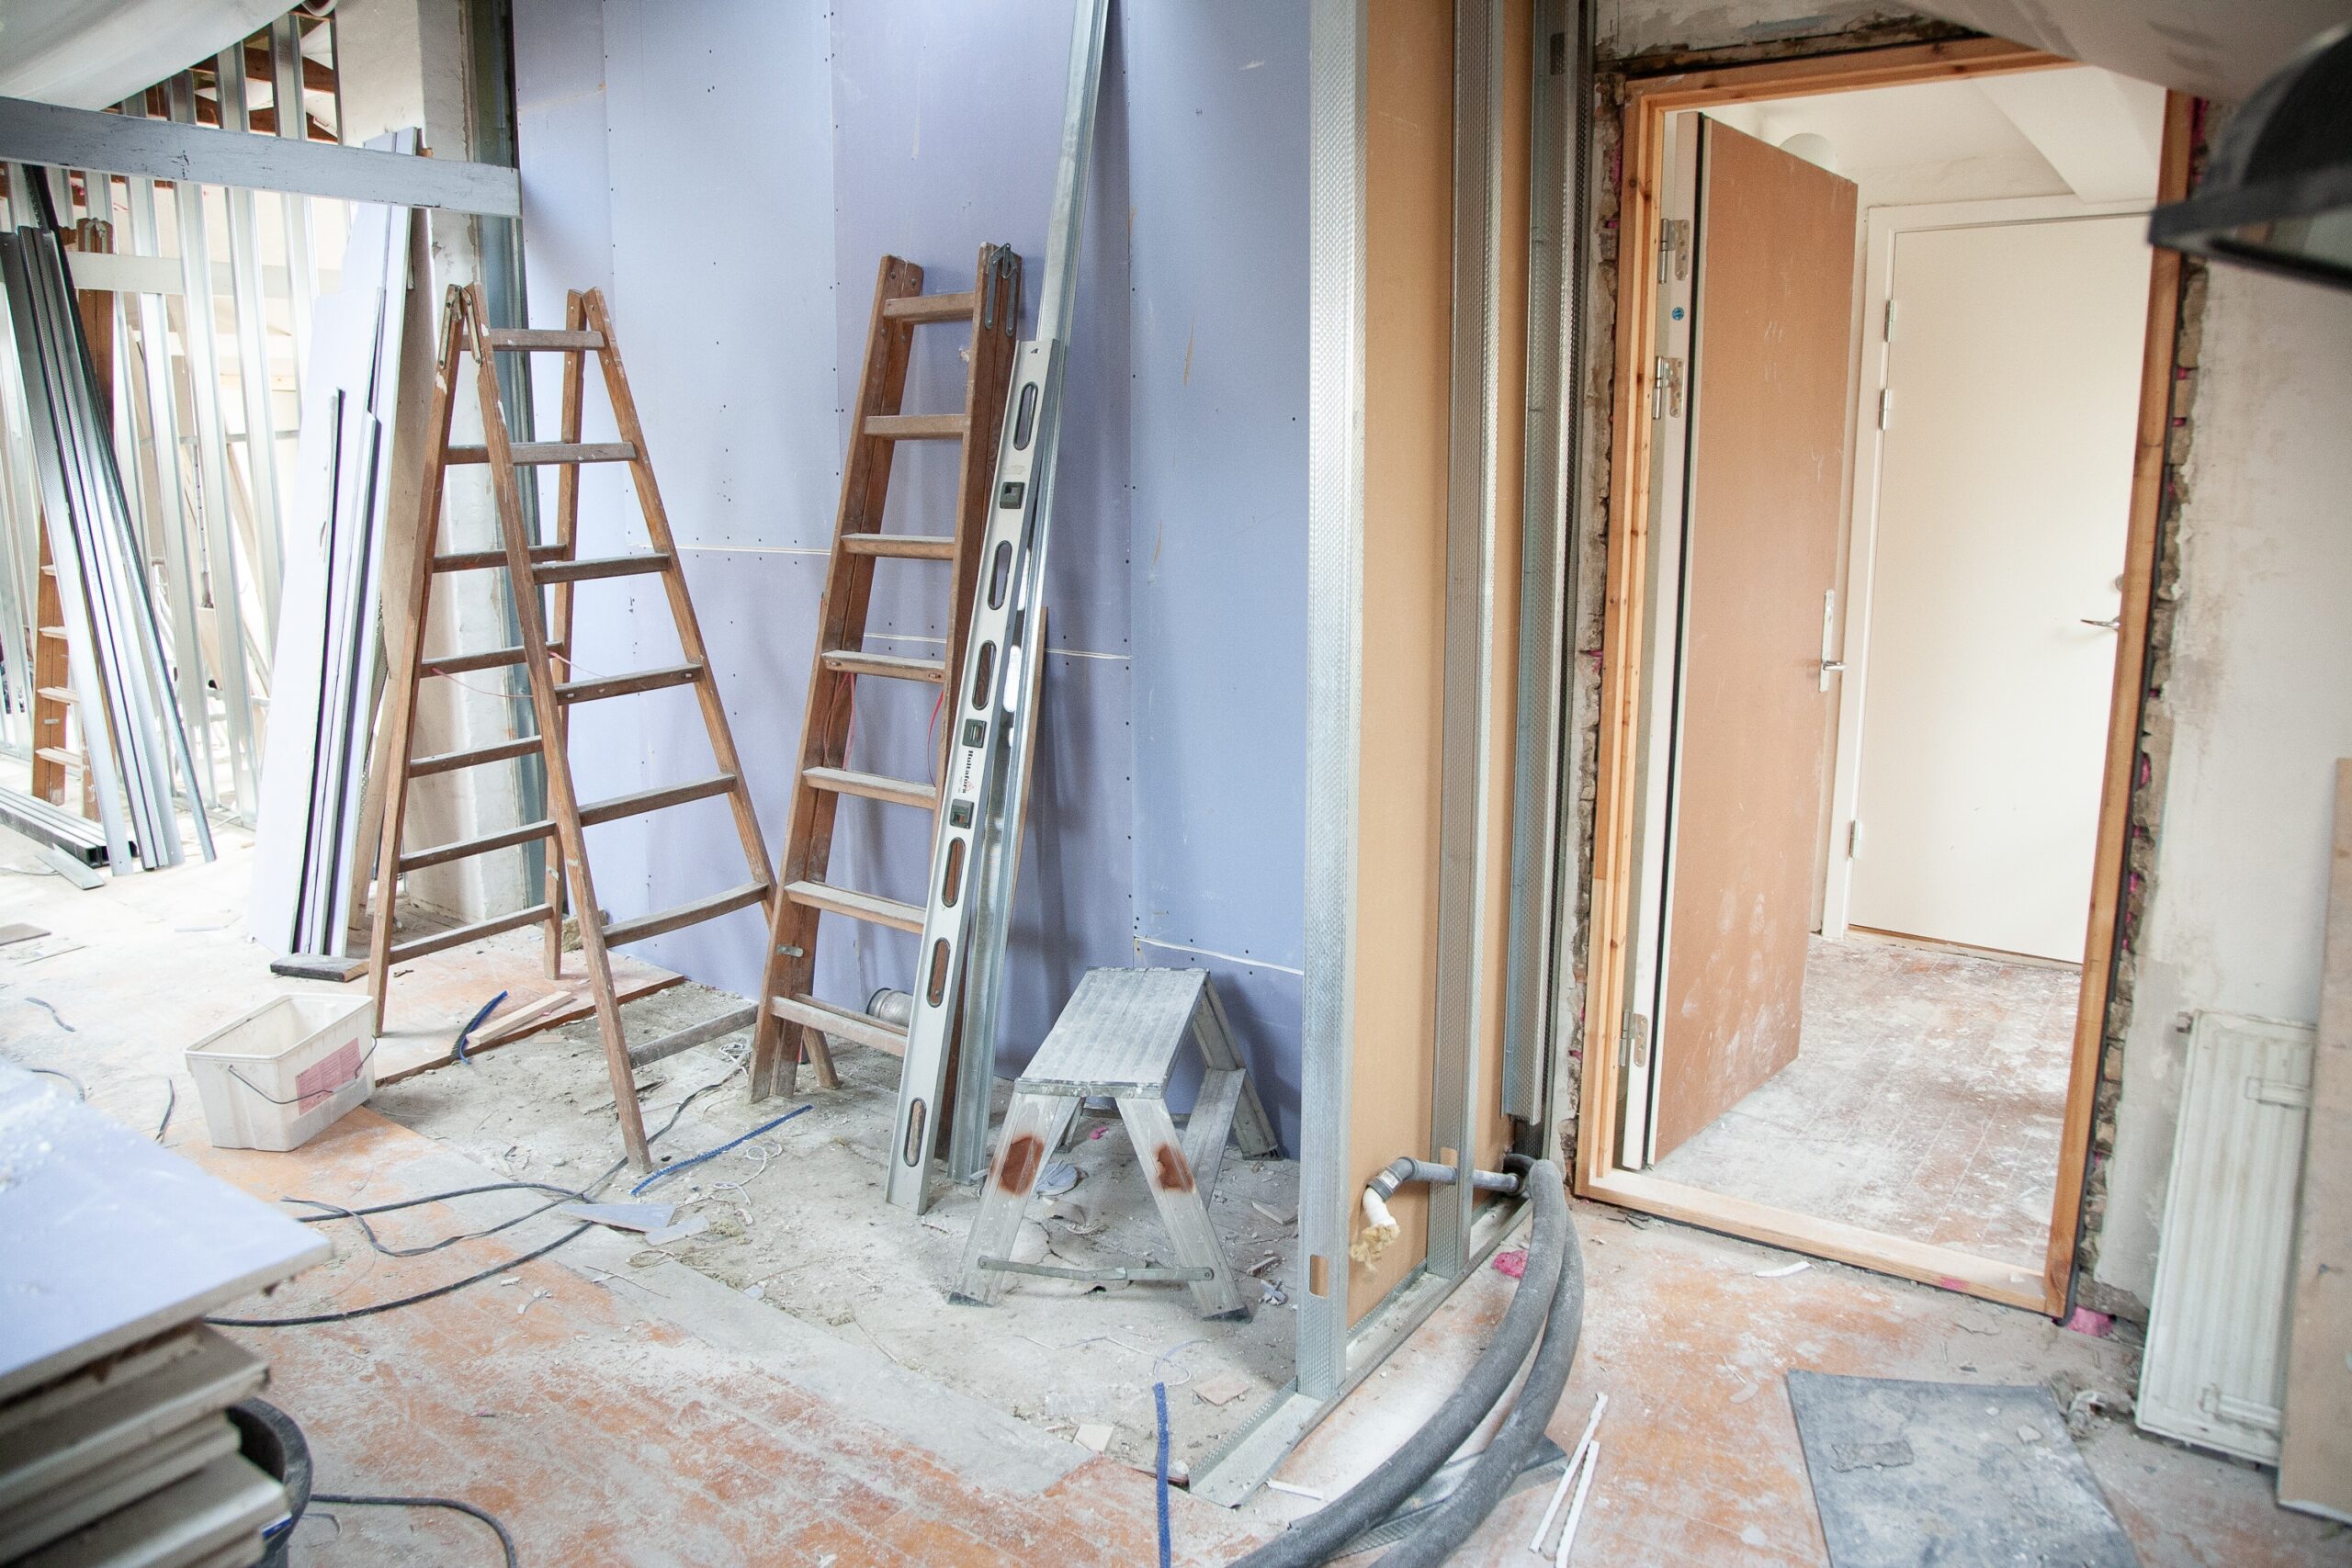 5 Things To Know Before Hiring a Home Remodeling Contractor in Austin, Texas